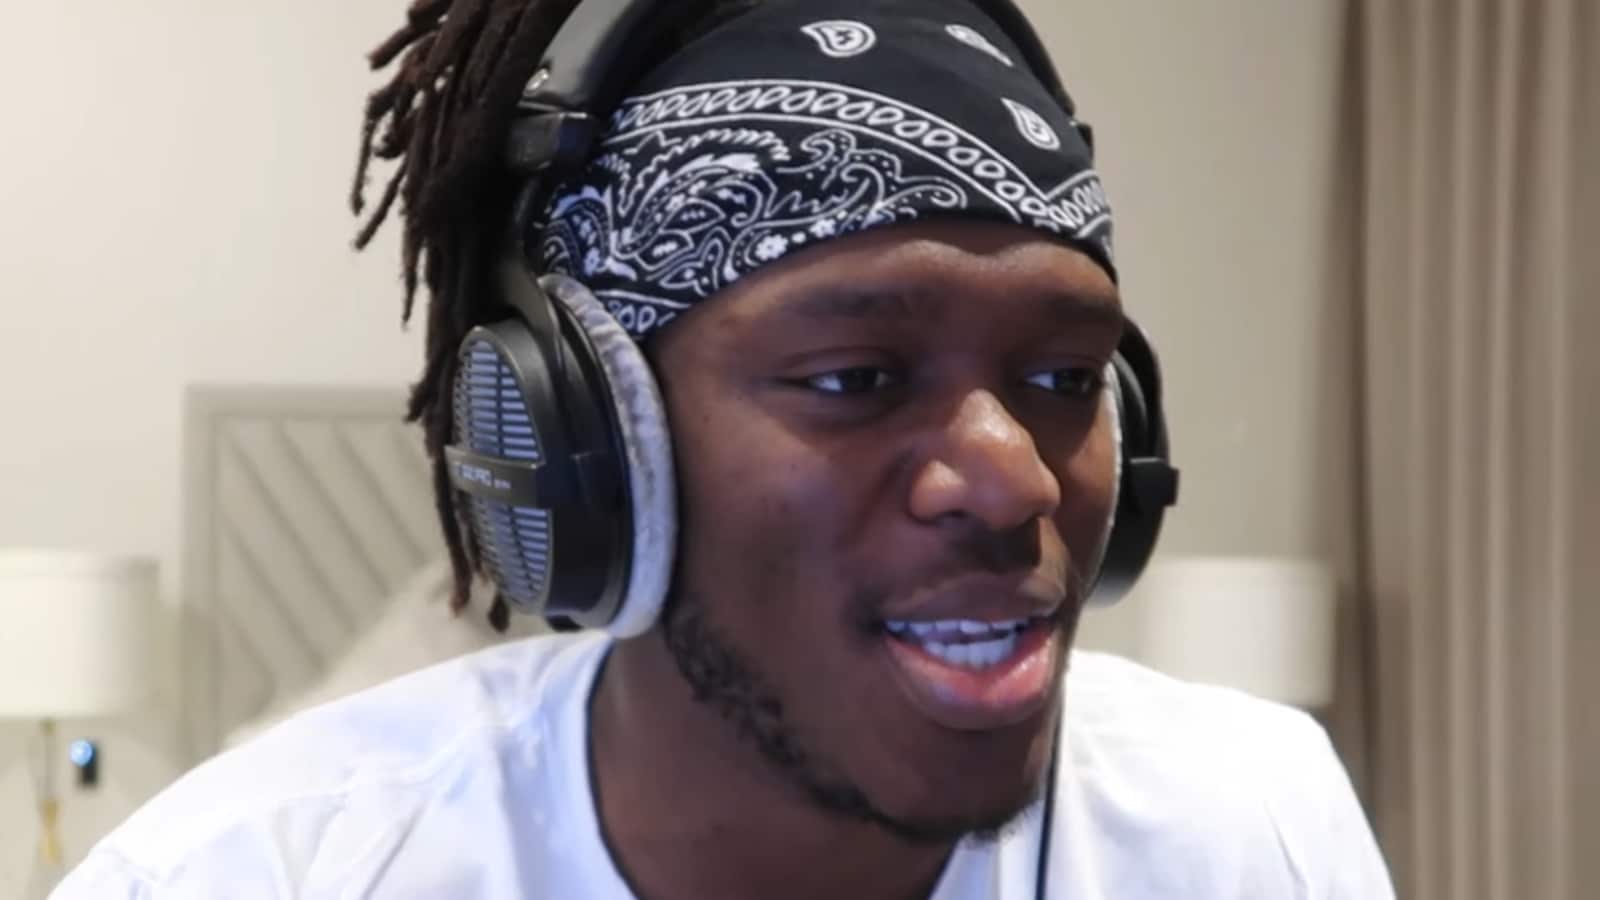 KSI hits back at claims of “ducking” AnEsonGib for boxing match